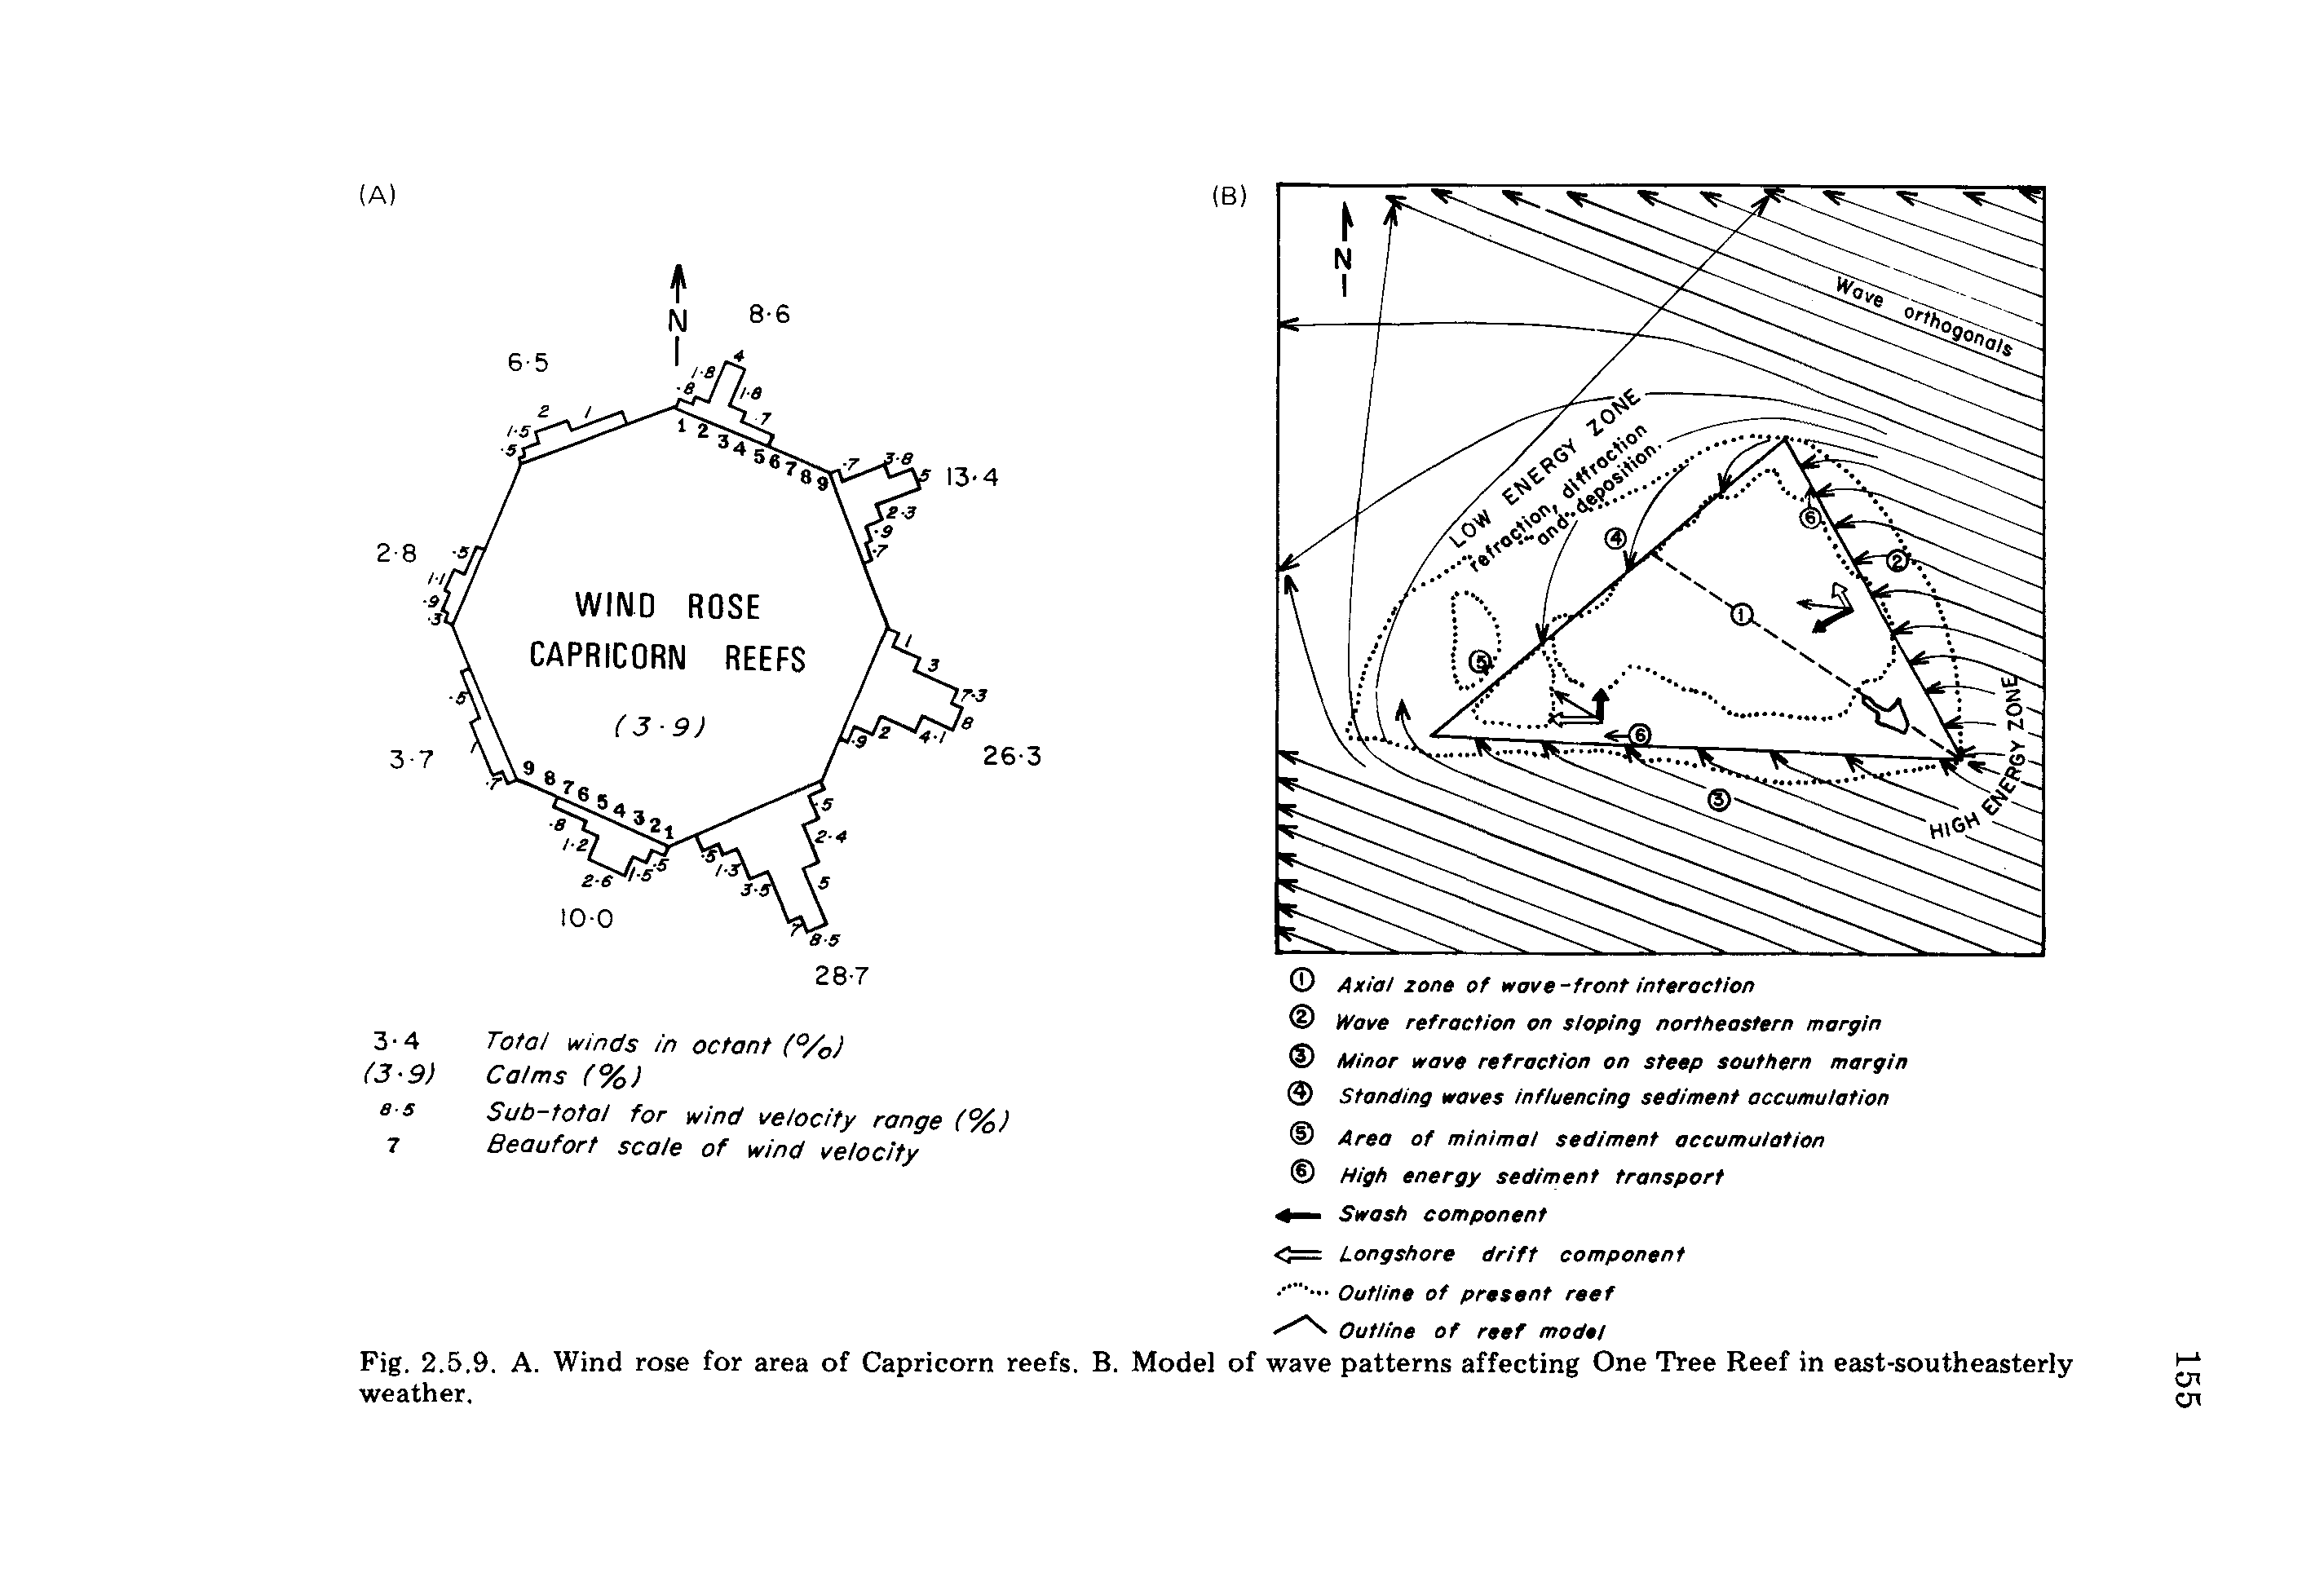 Fig. 2.5.9. A. Wind rose for area of Capricorn reefs weather.